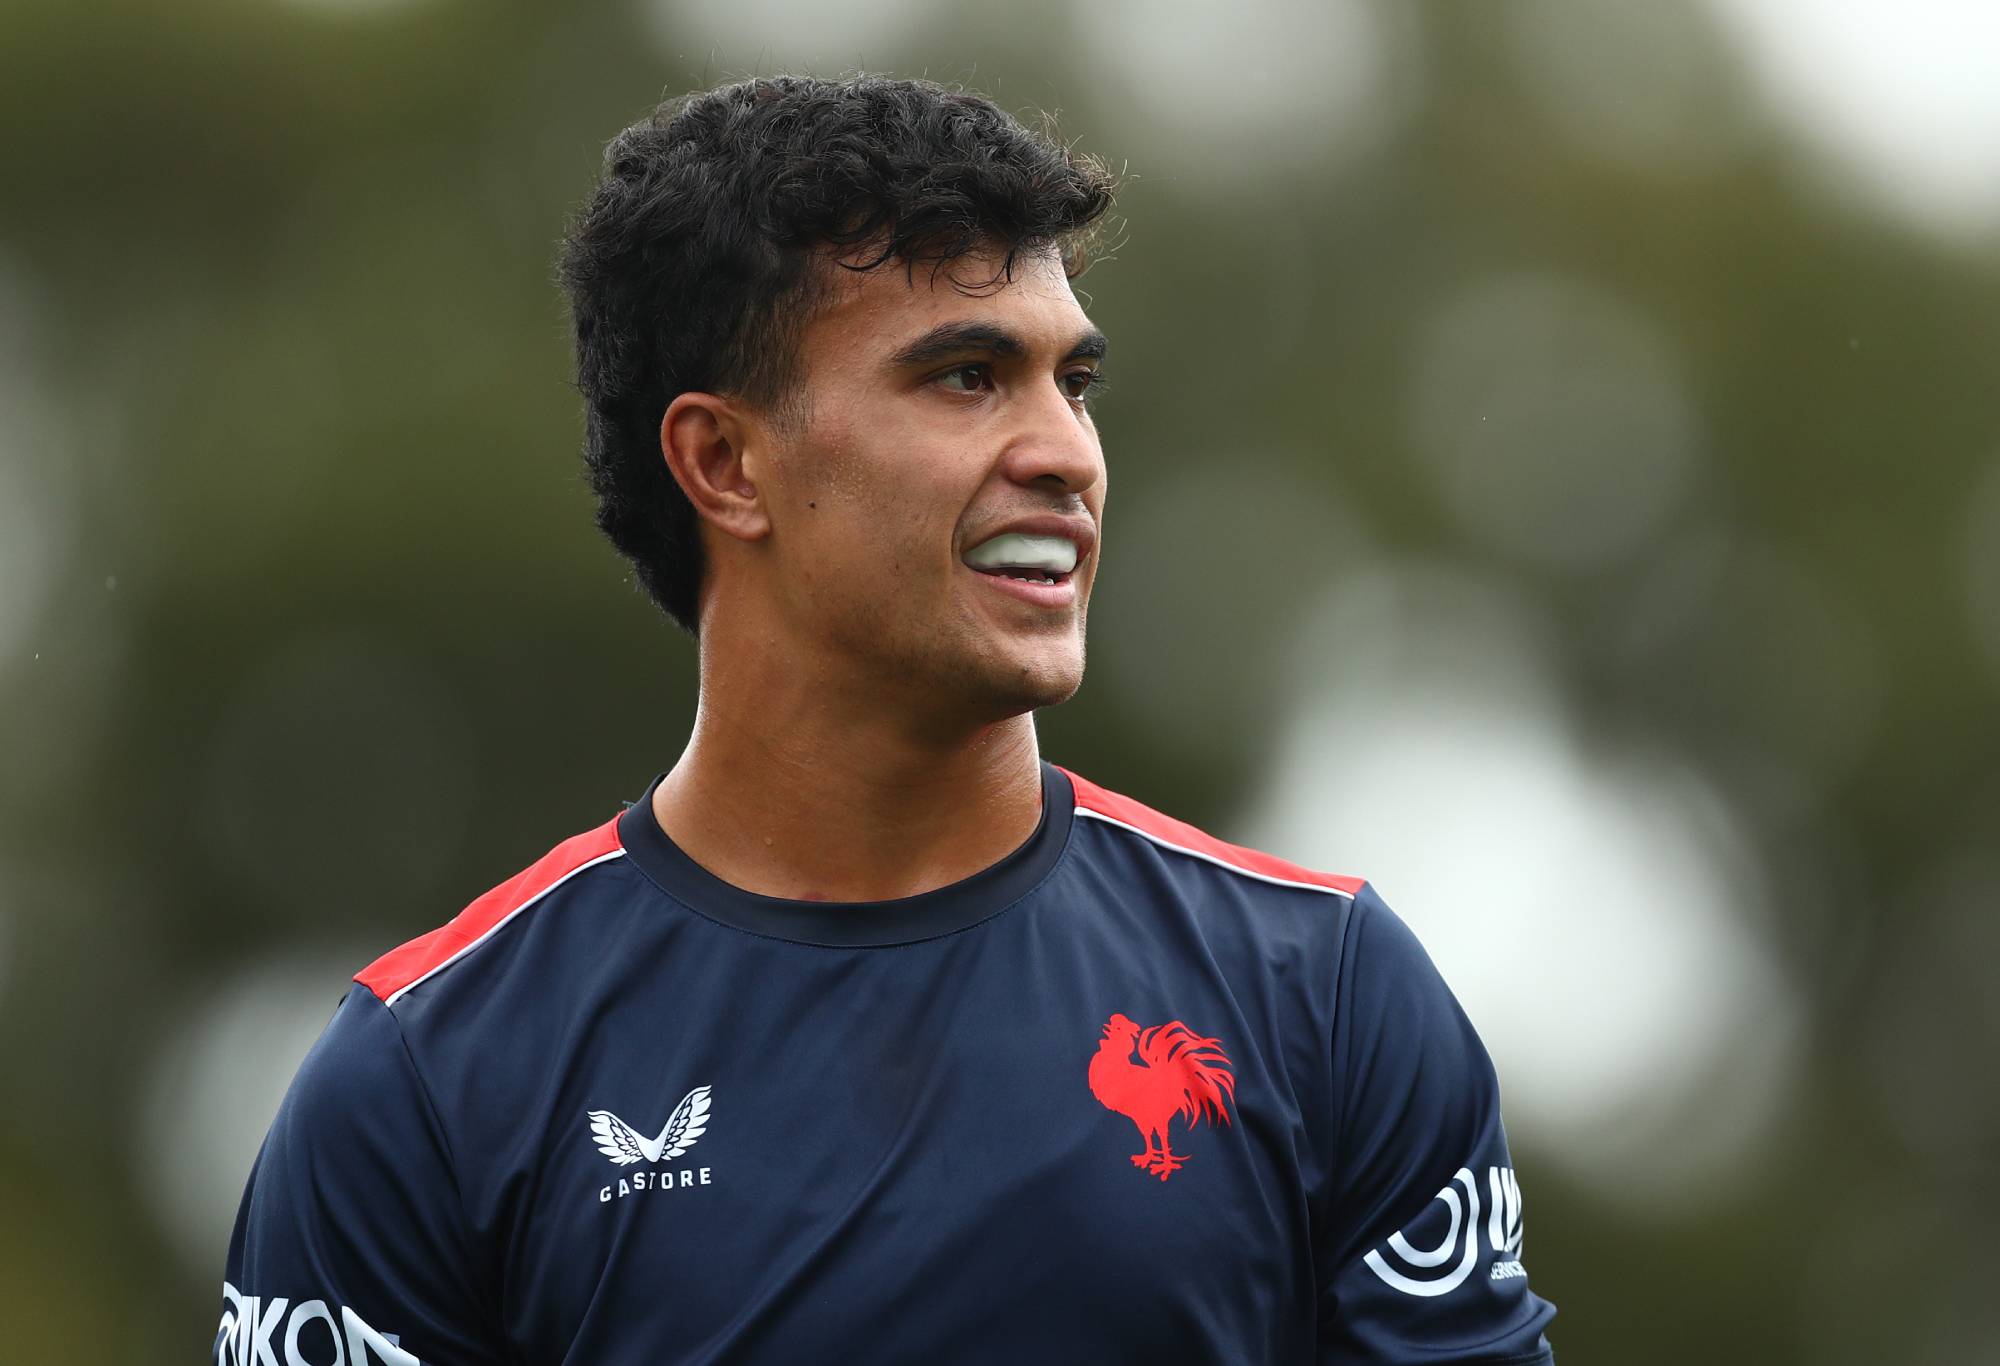 SYDNEY, AUSTRALIA - MARCH 29: Joseph Suaalii smiles during a Sydney Roosters NRL training session at Kippax Lake on March 29, 2022 in Sydney, Australia. (Photo by Mark Metcalfe/Getty Images)